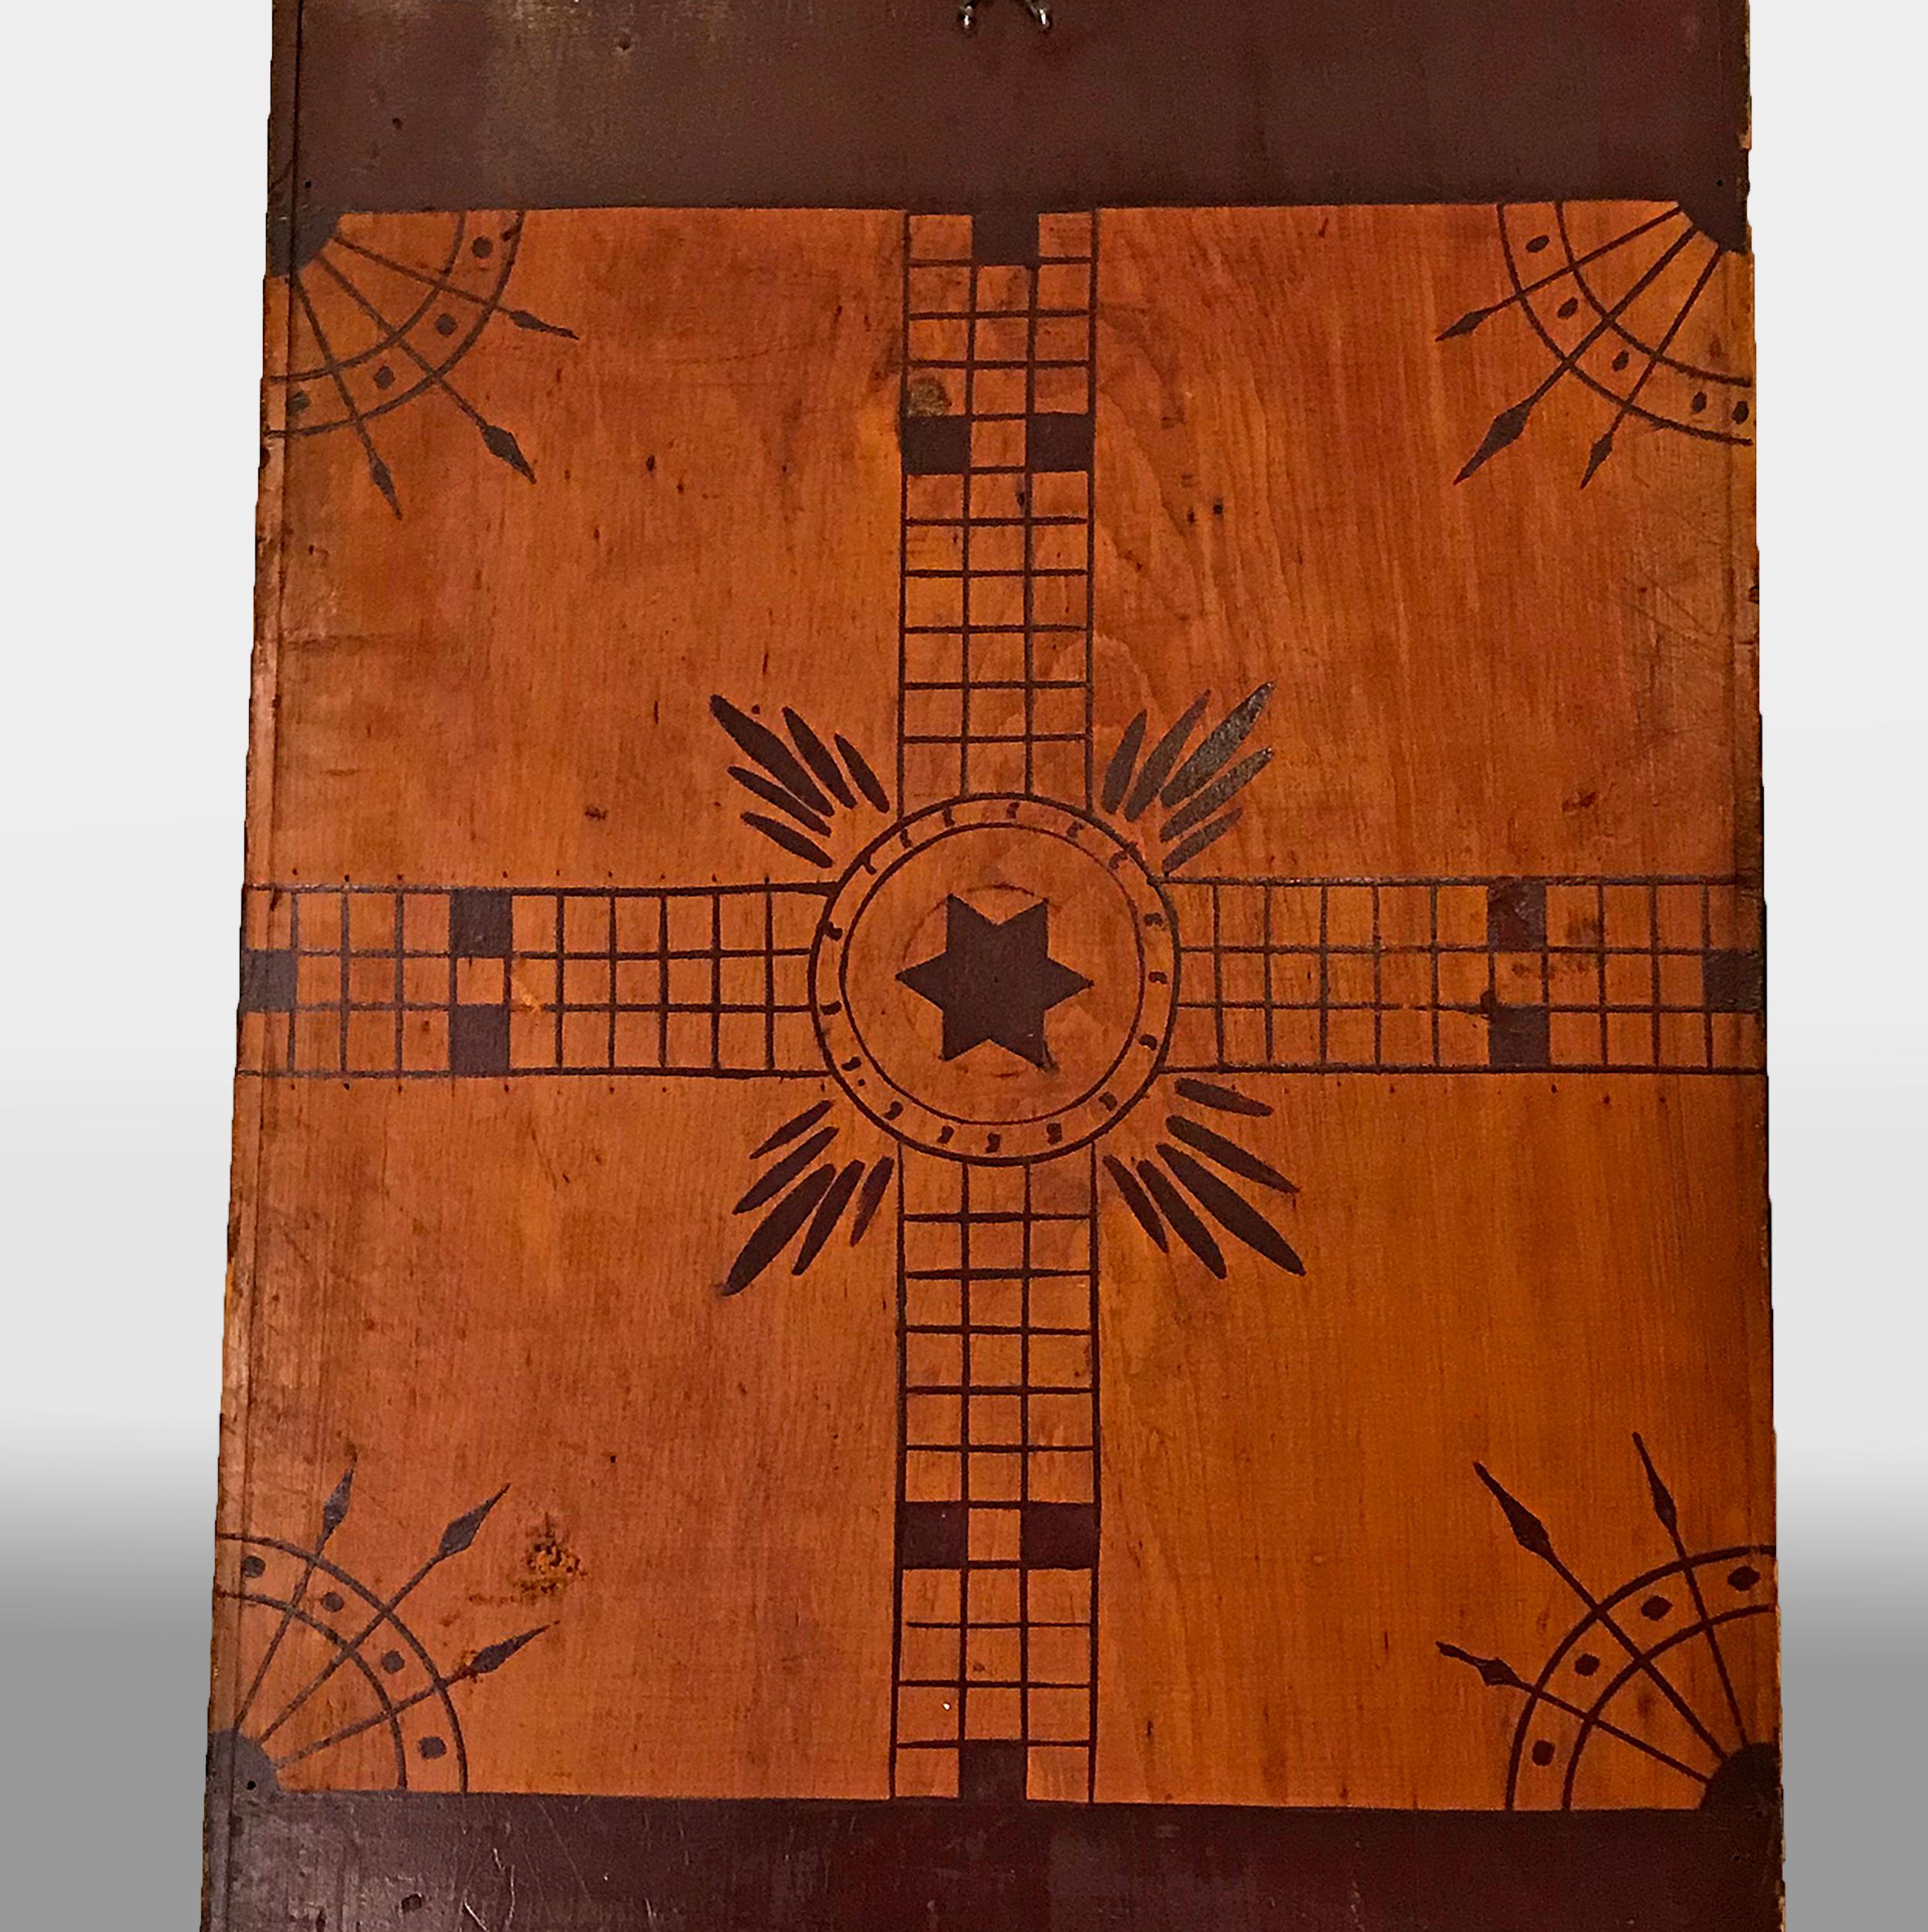 Hand-Painted Large Game Board, Checkers and Parcheesi